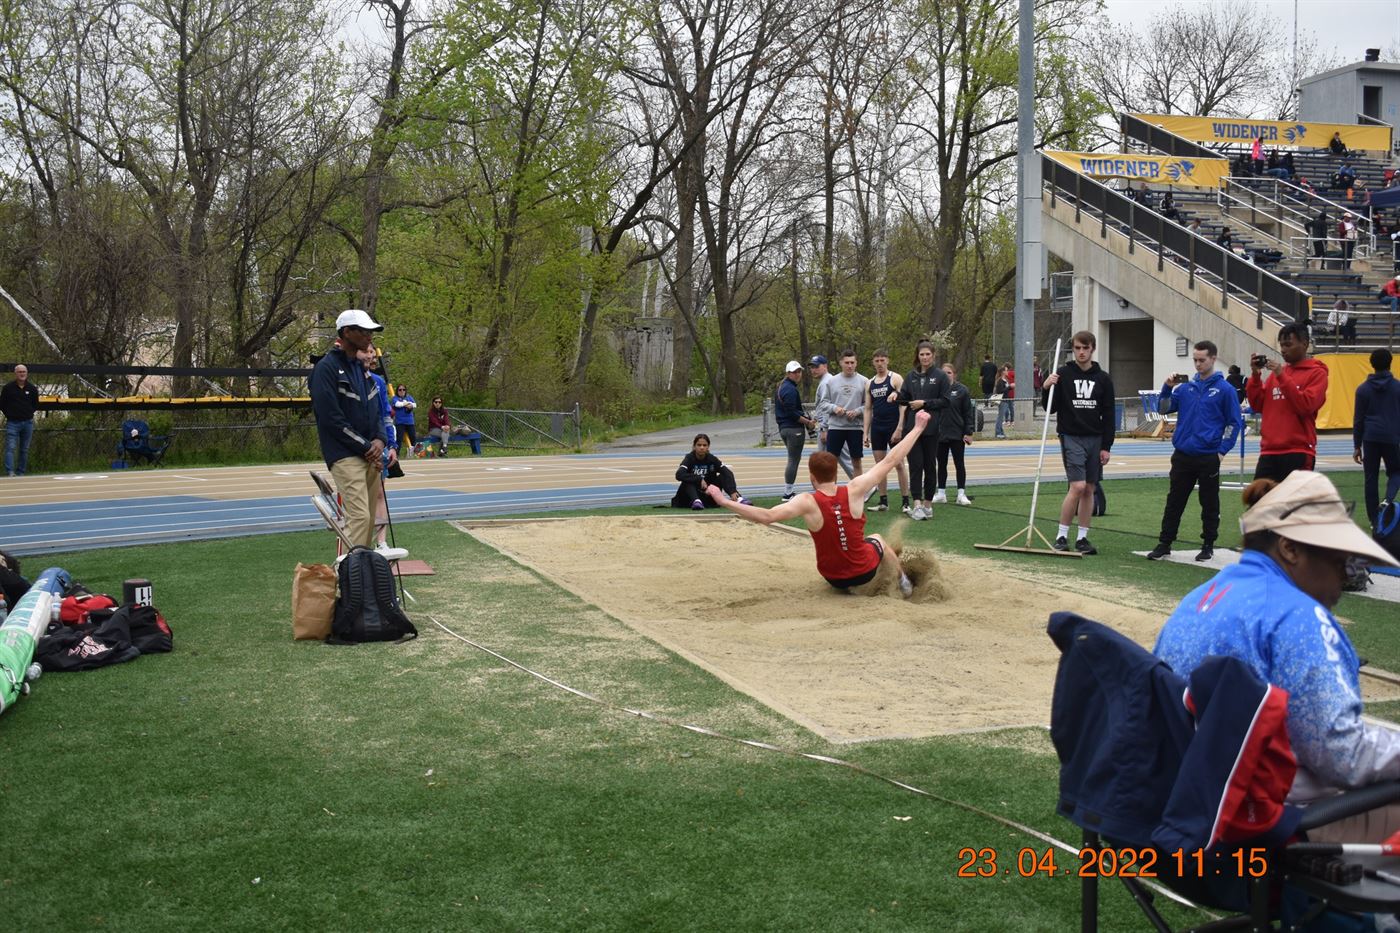 DiMaulo has said he runs the 100-meter and 200-meter races to help his long jump. Photo courtesy of Anthony DiMaulo